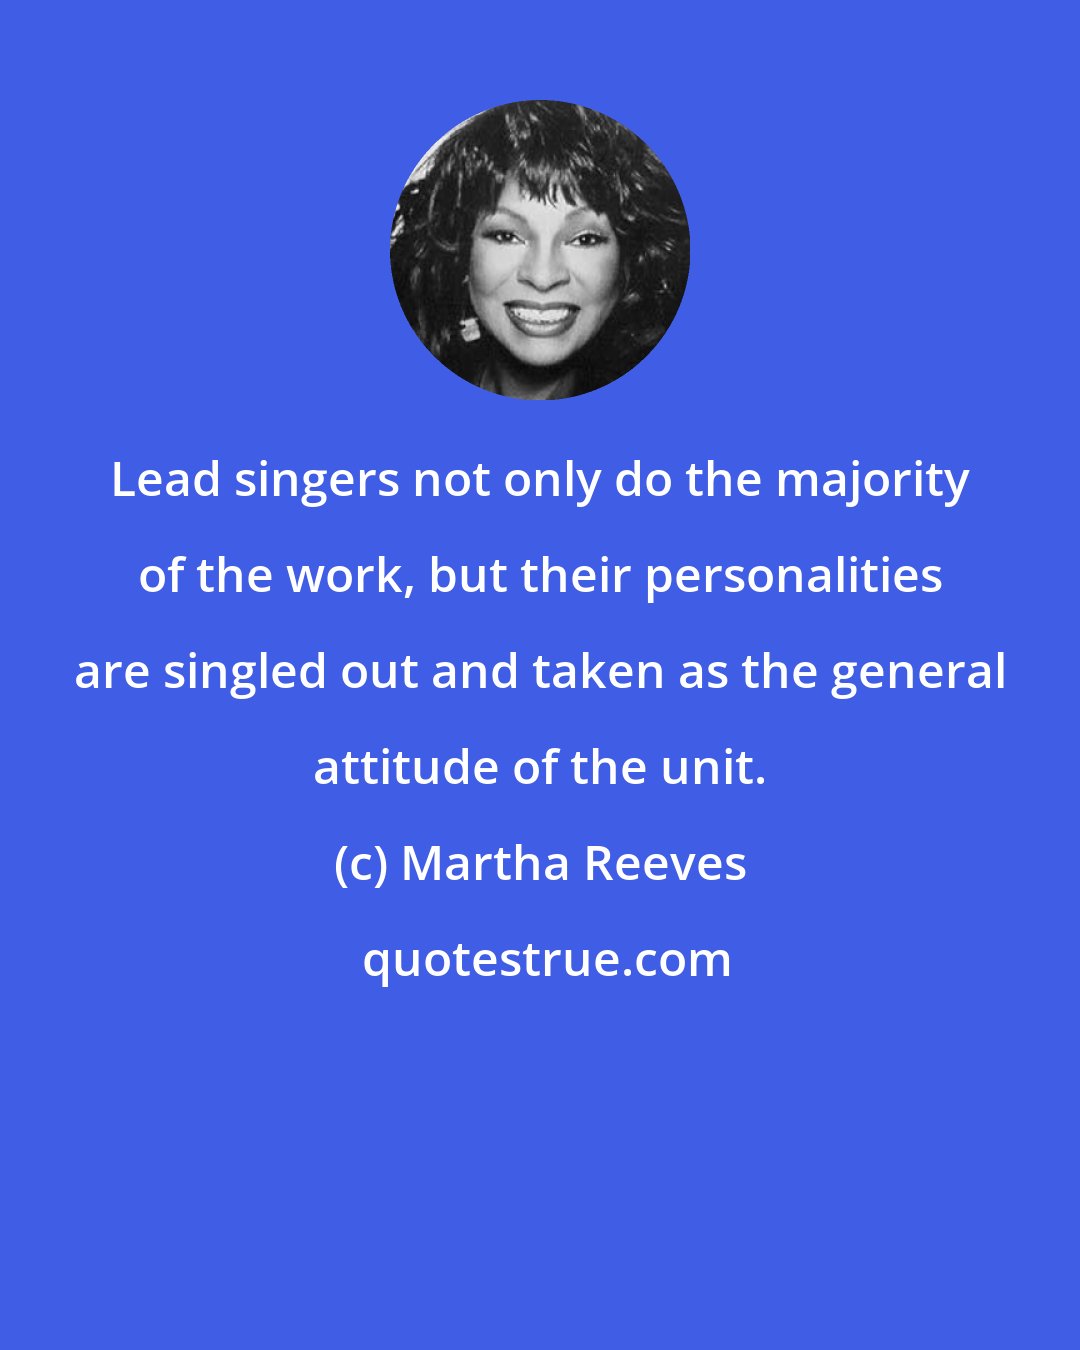 Martha Reeves: Lead singers not only do the majority of the work, but their personalities are singled out and taken as the general attitude of the unit.